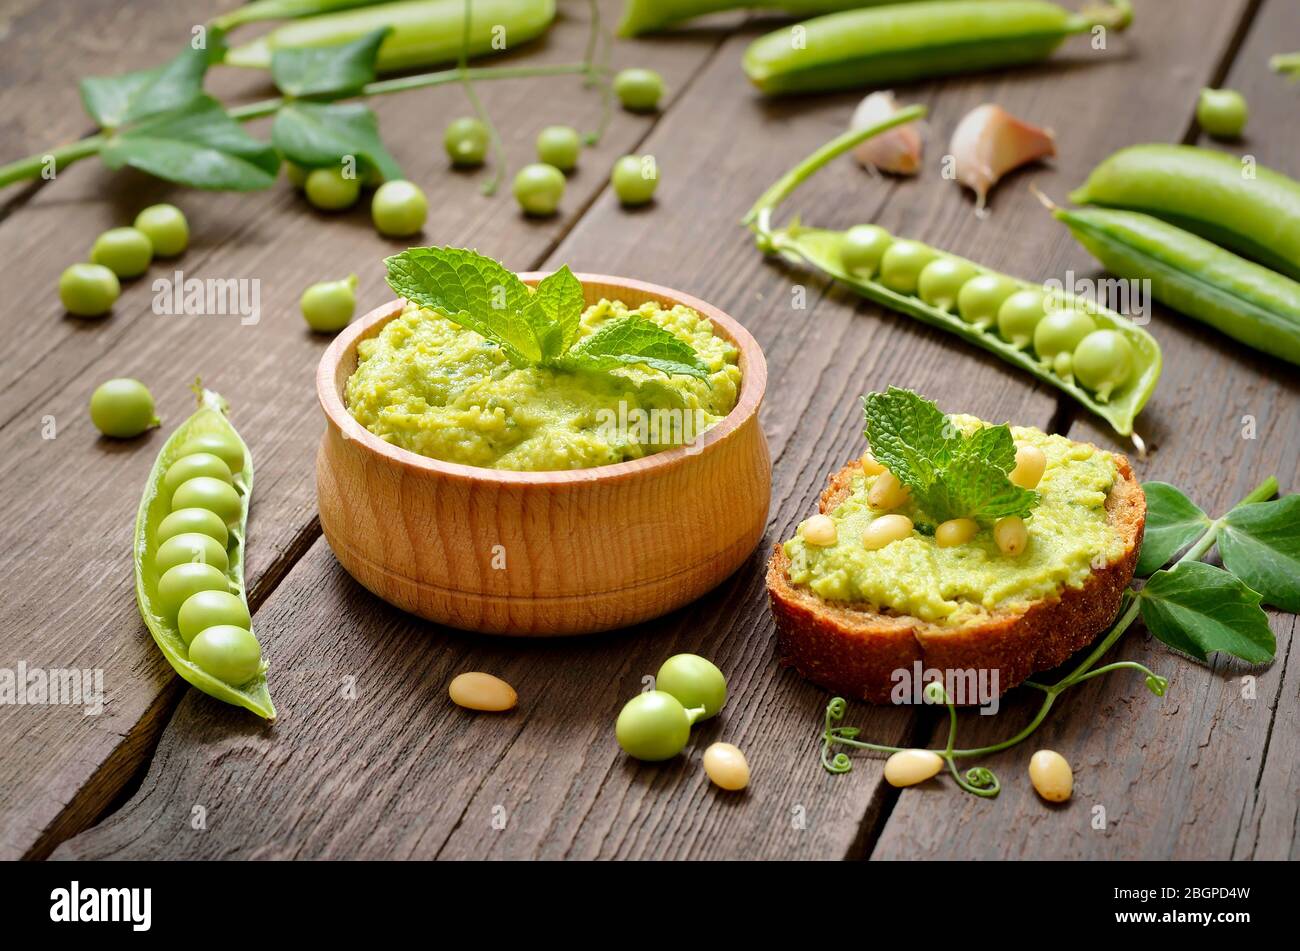 Homemade green pea puree in wooden bowl Stock Photo